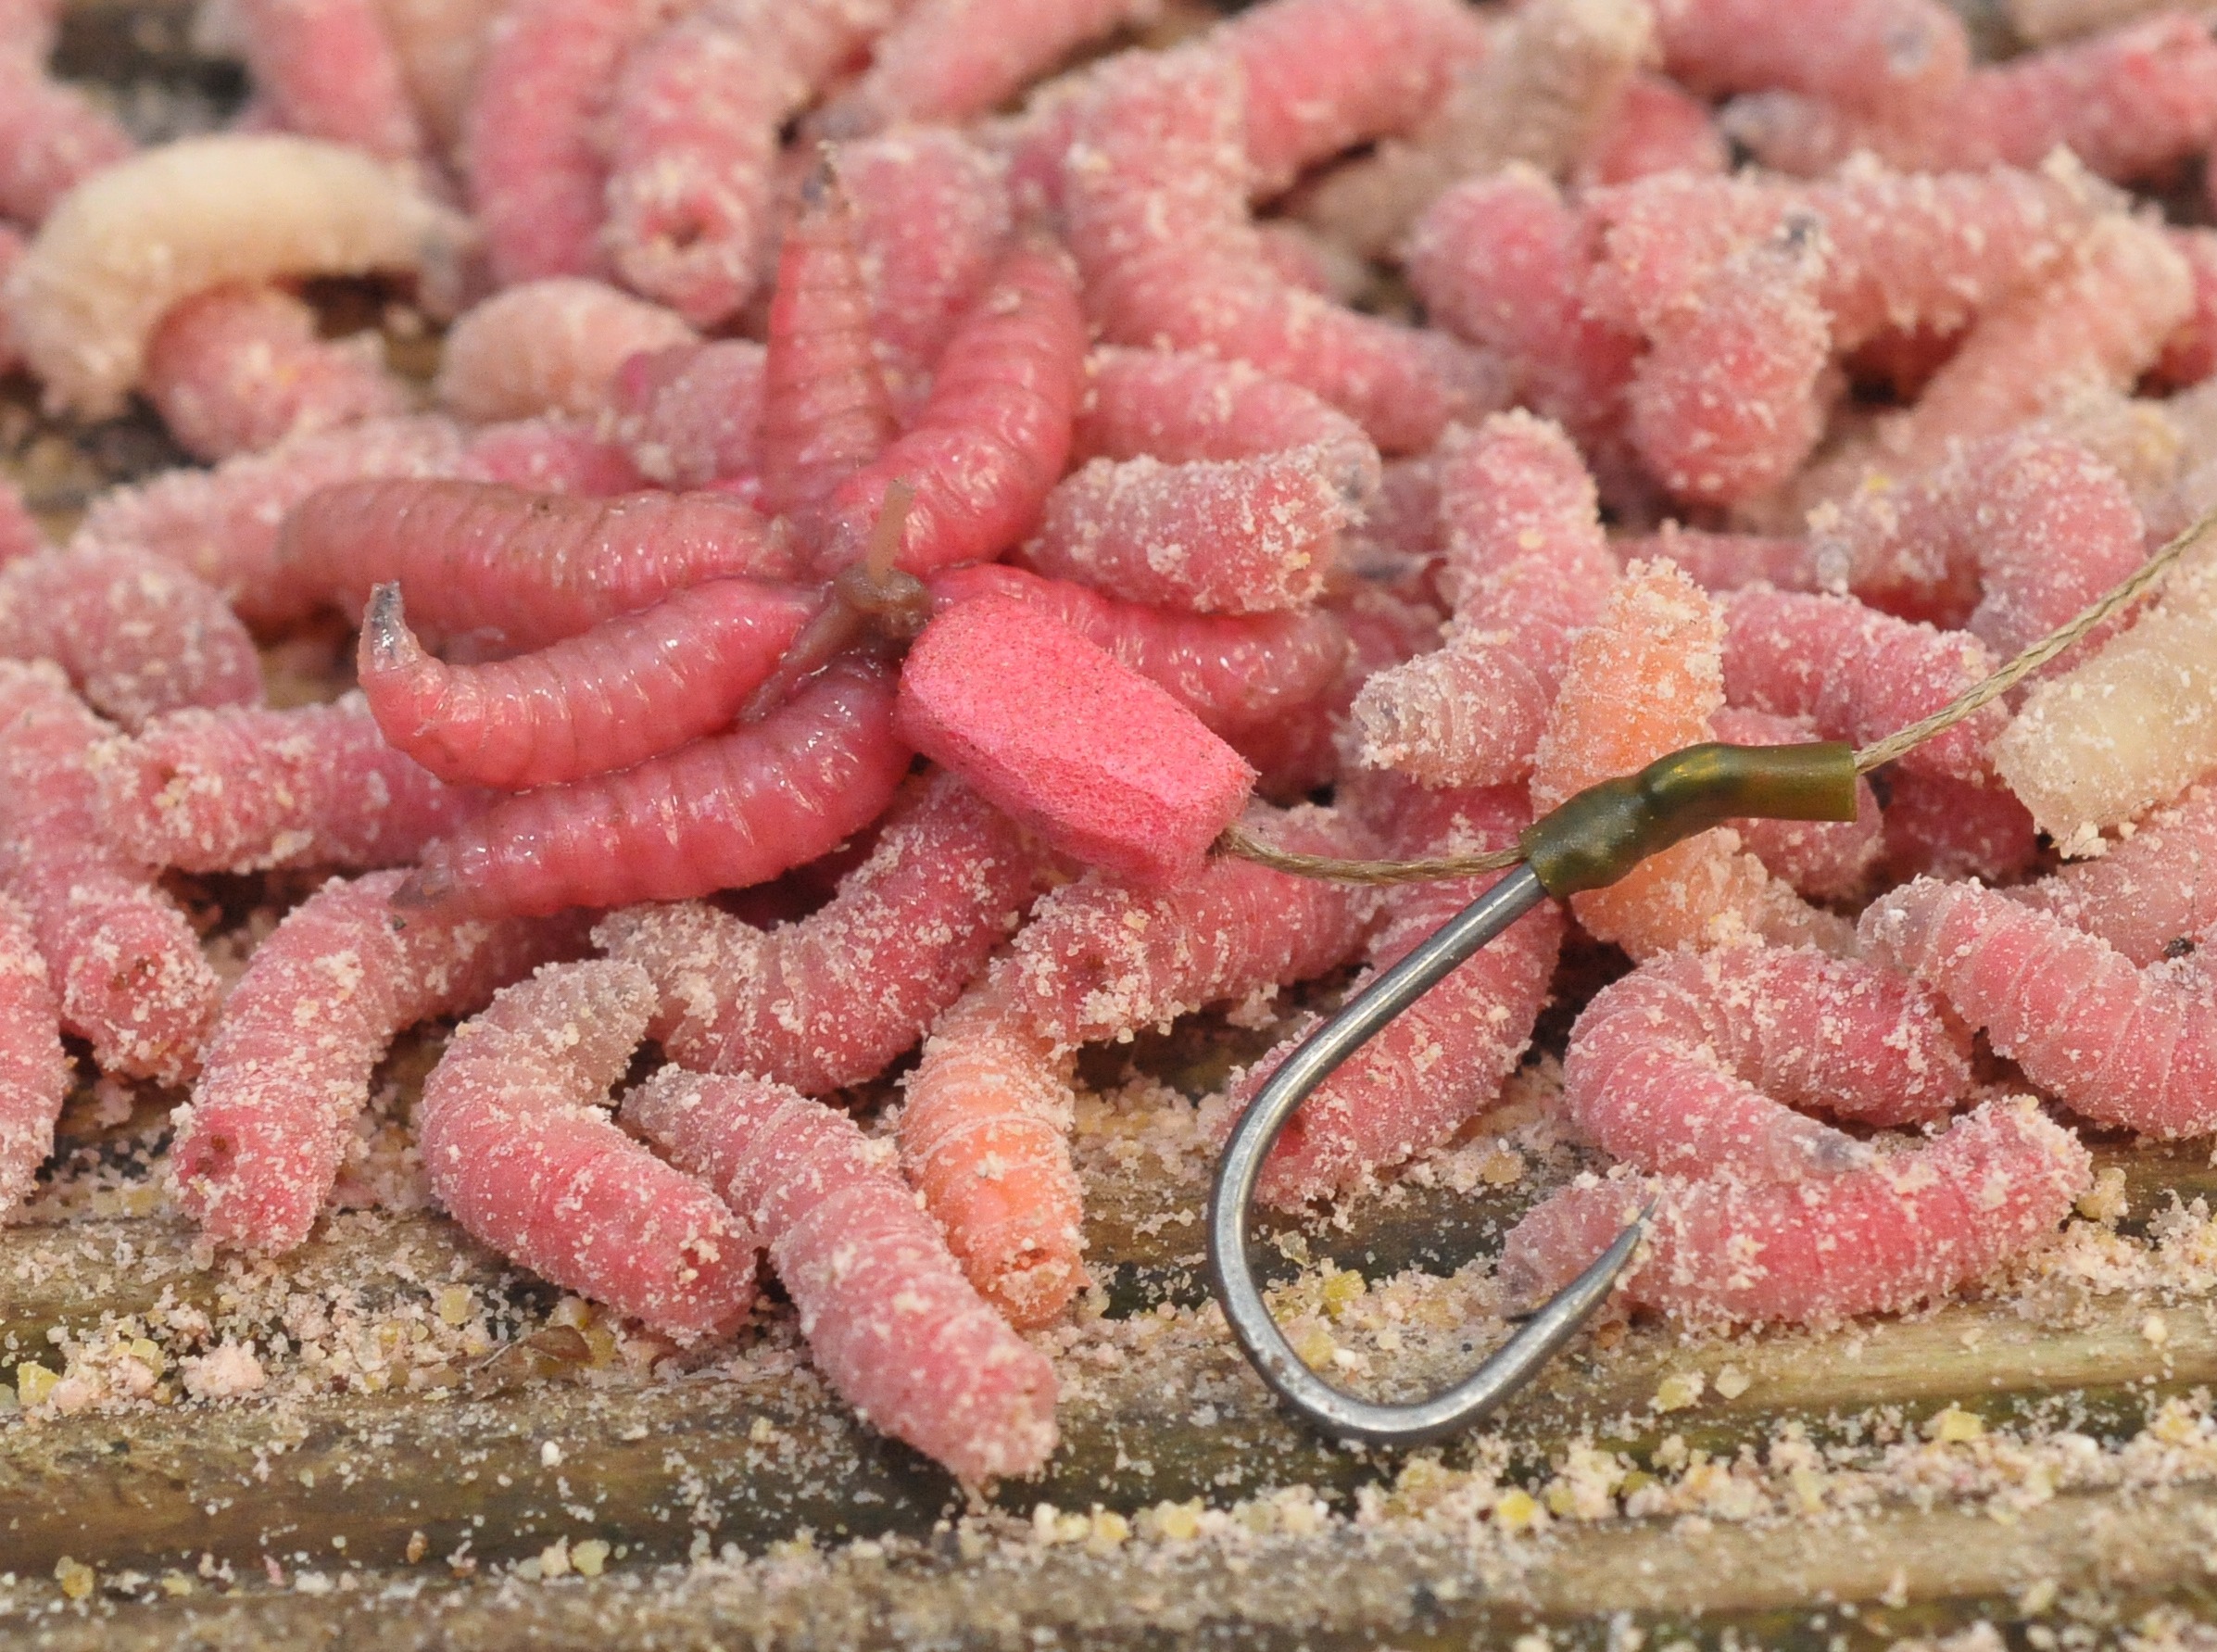 Maggots are a great winter choice.